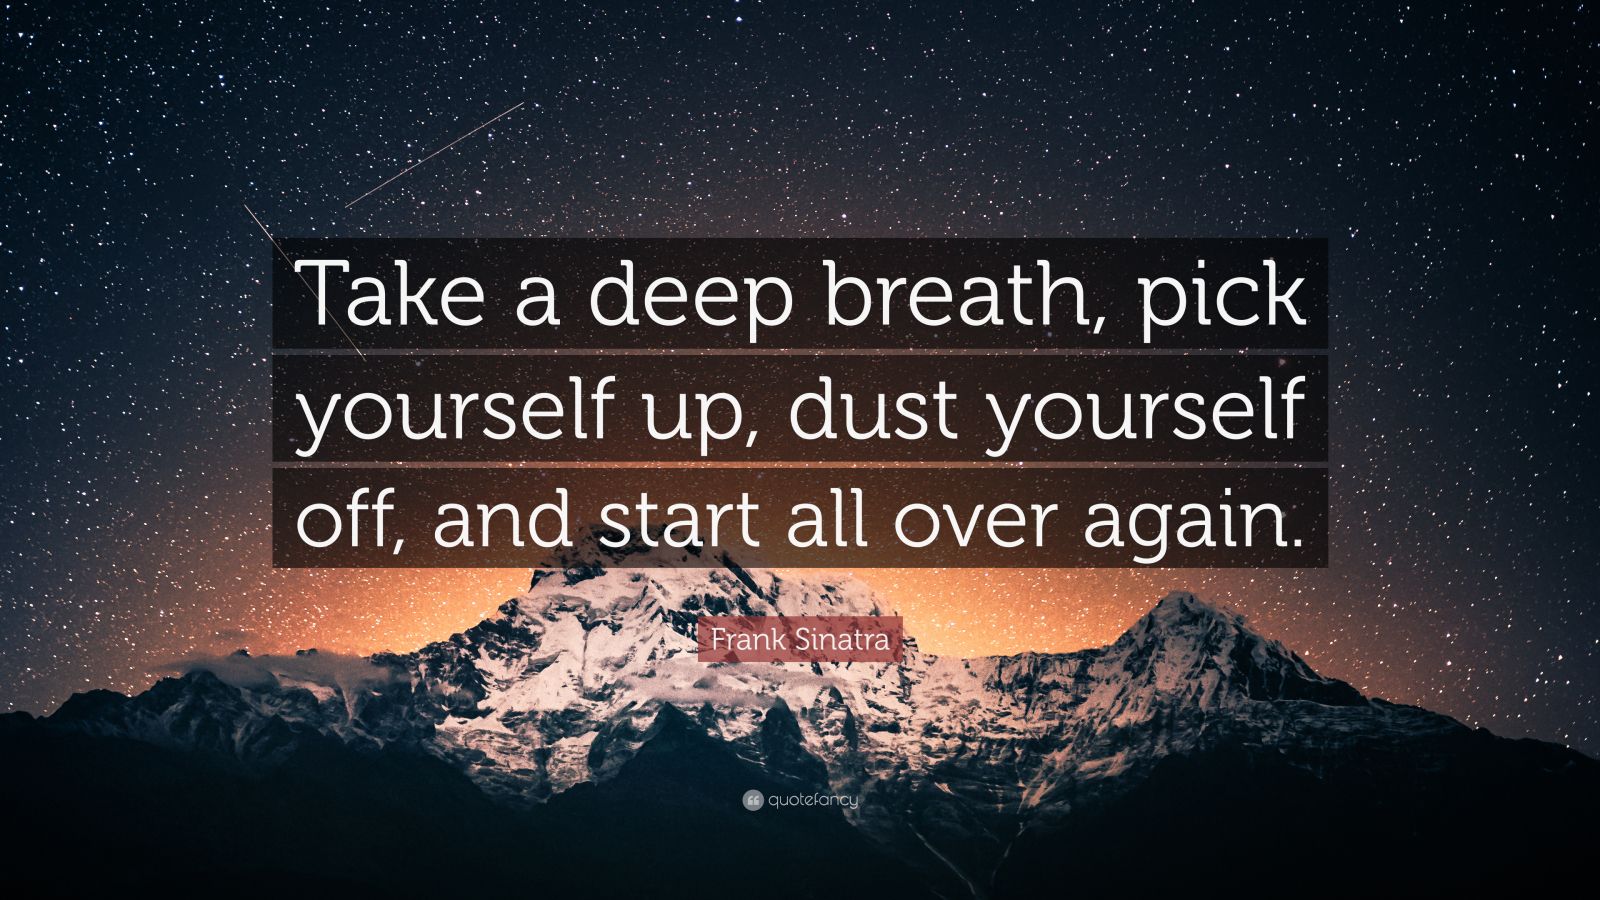 Frank Sinatra Quote: “Take a deep breath, pick yourself up, dust ...